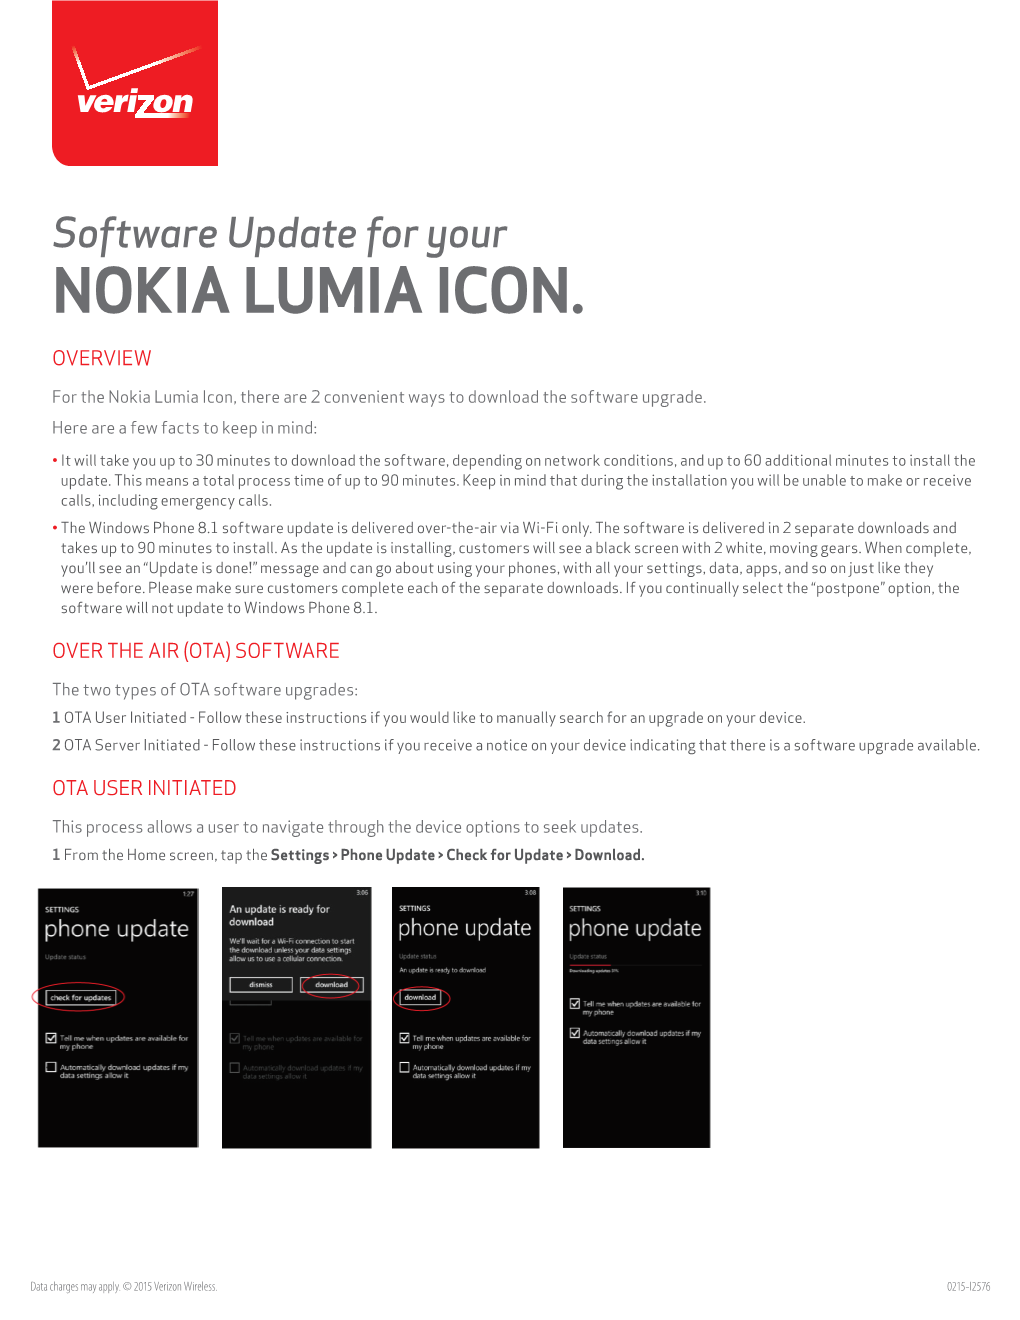 Software Update for Your NOKIA LUMIA ICON